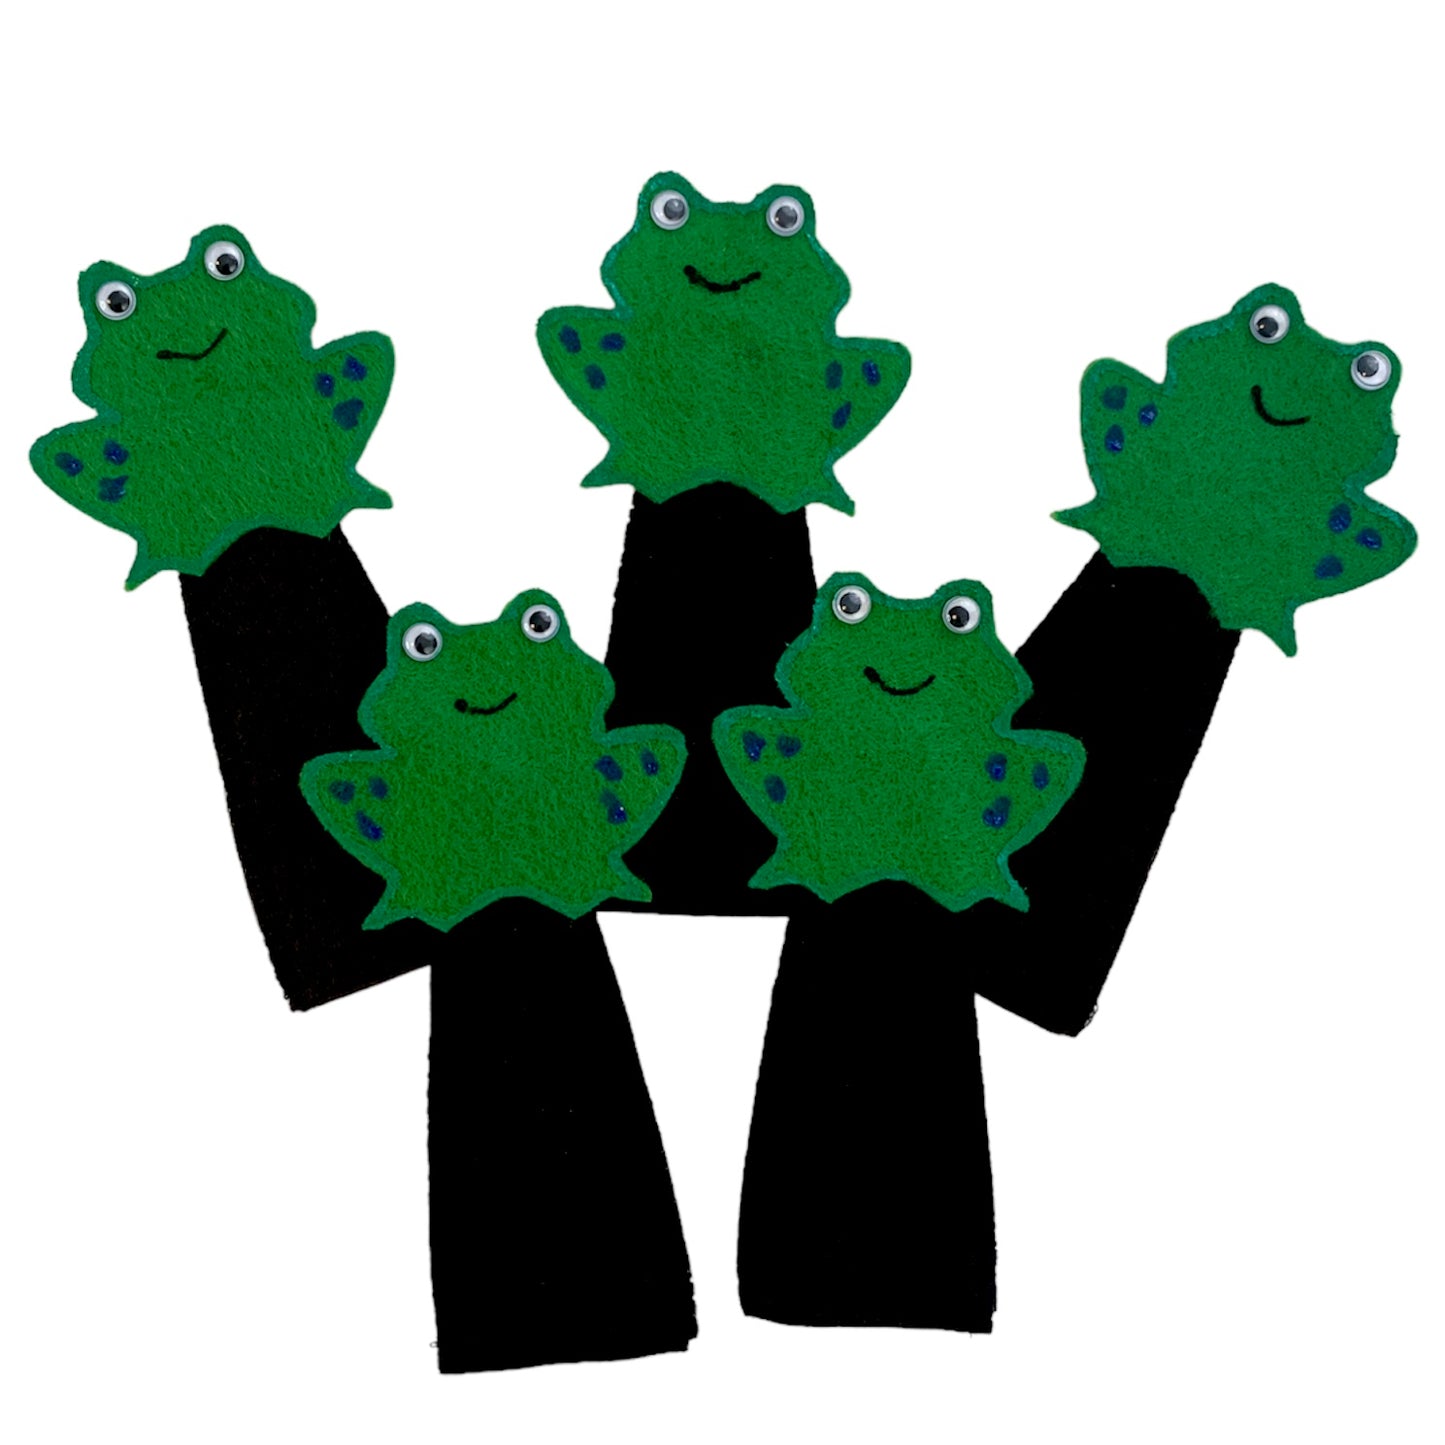 Finger Puppets - 5 Green and Speckled Frogs